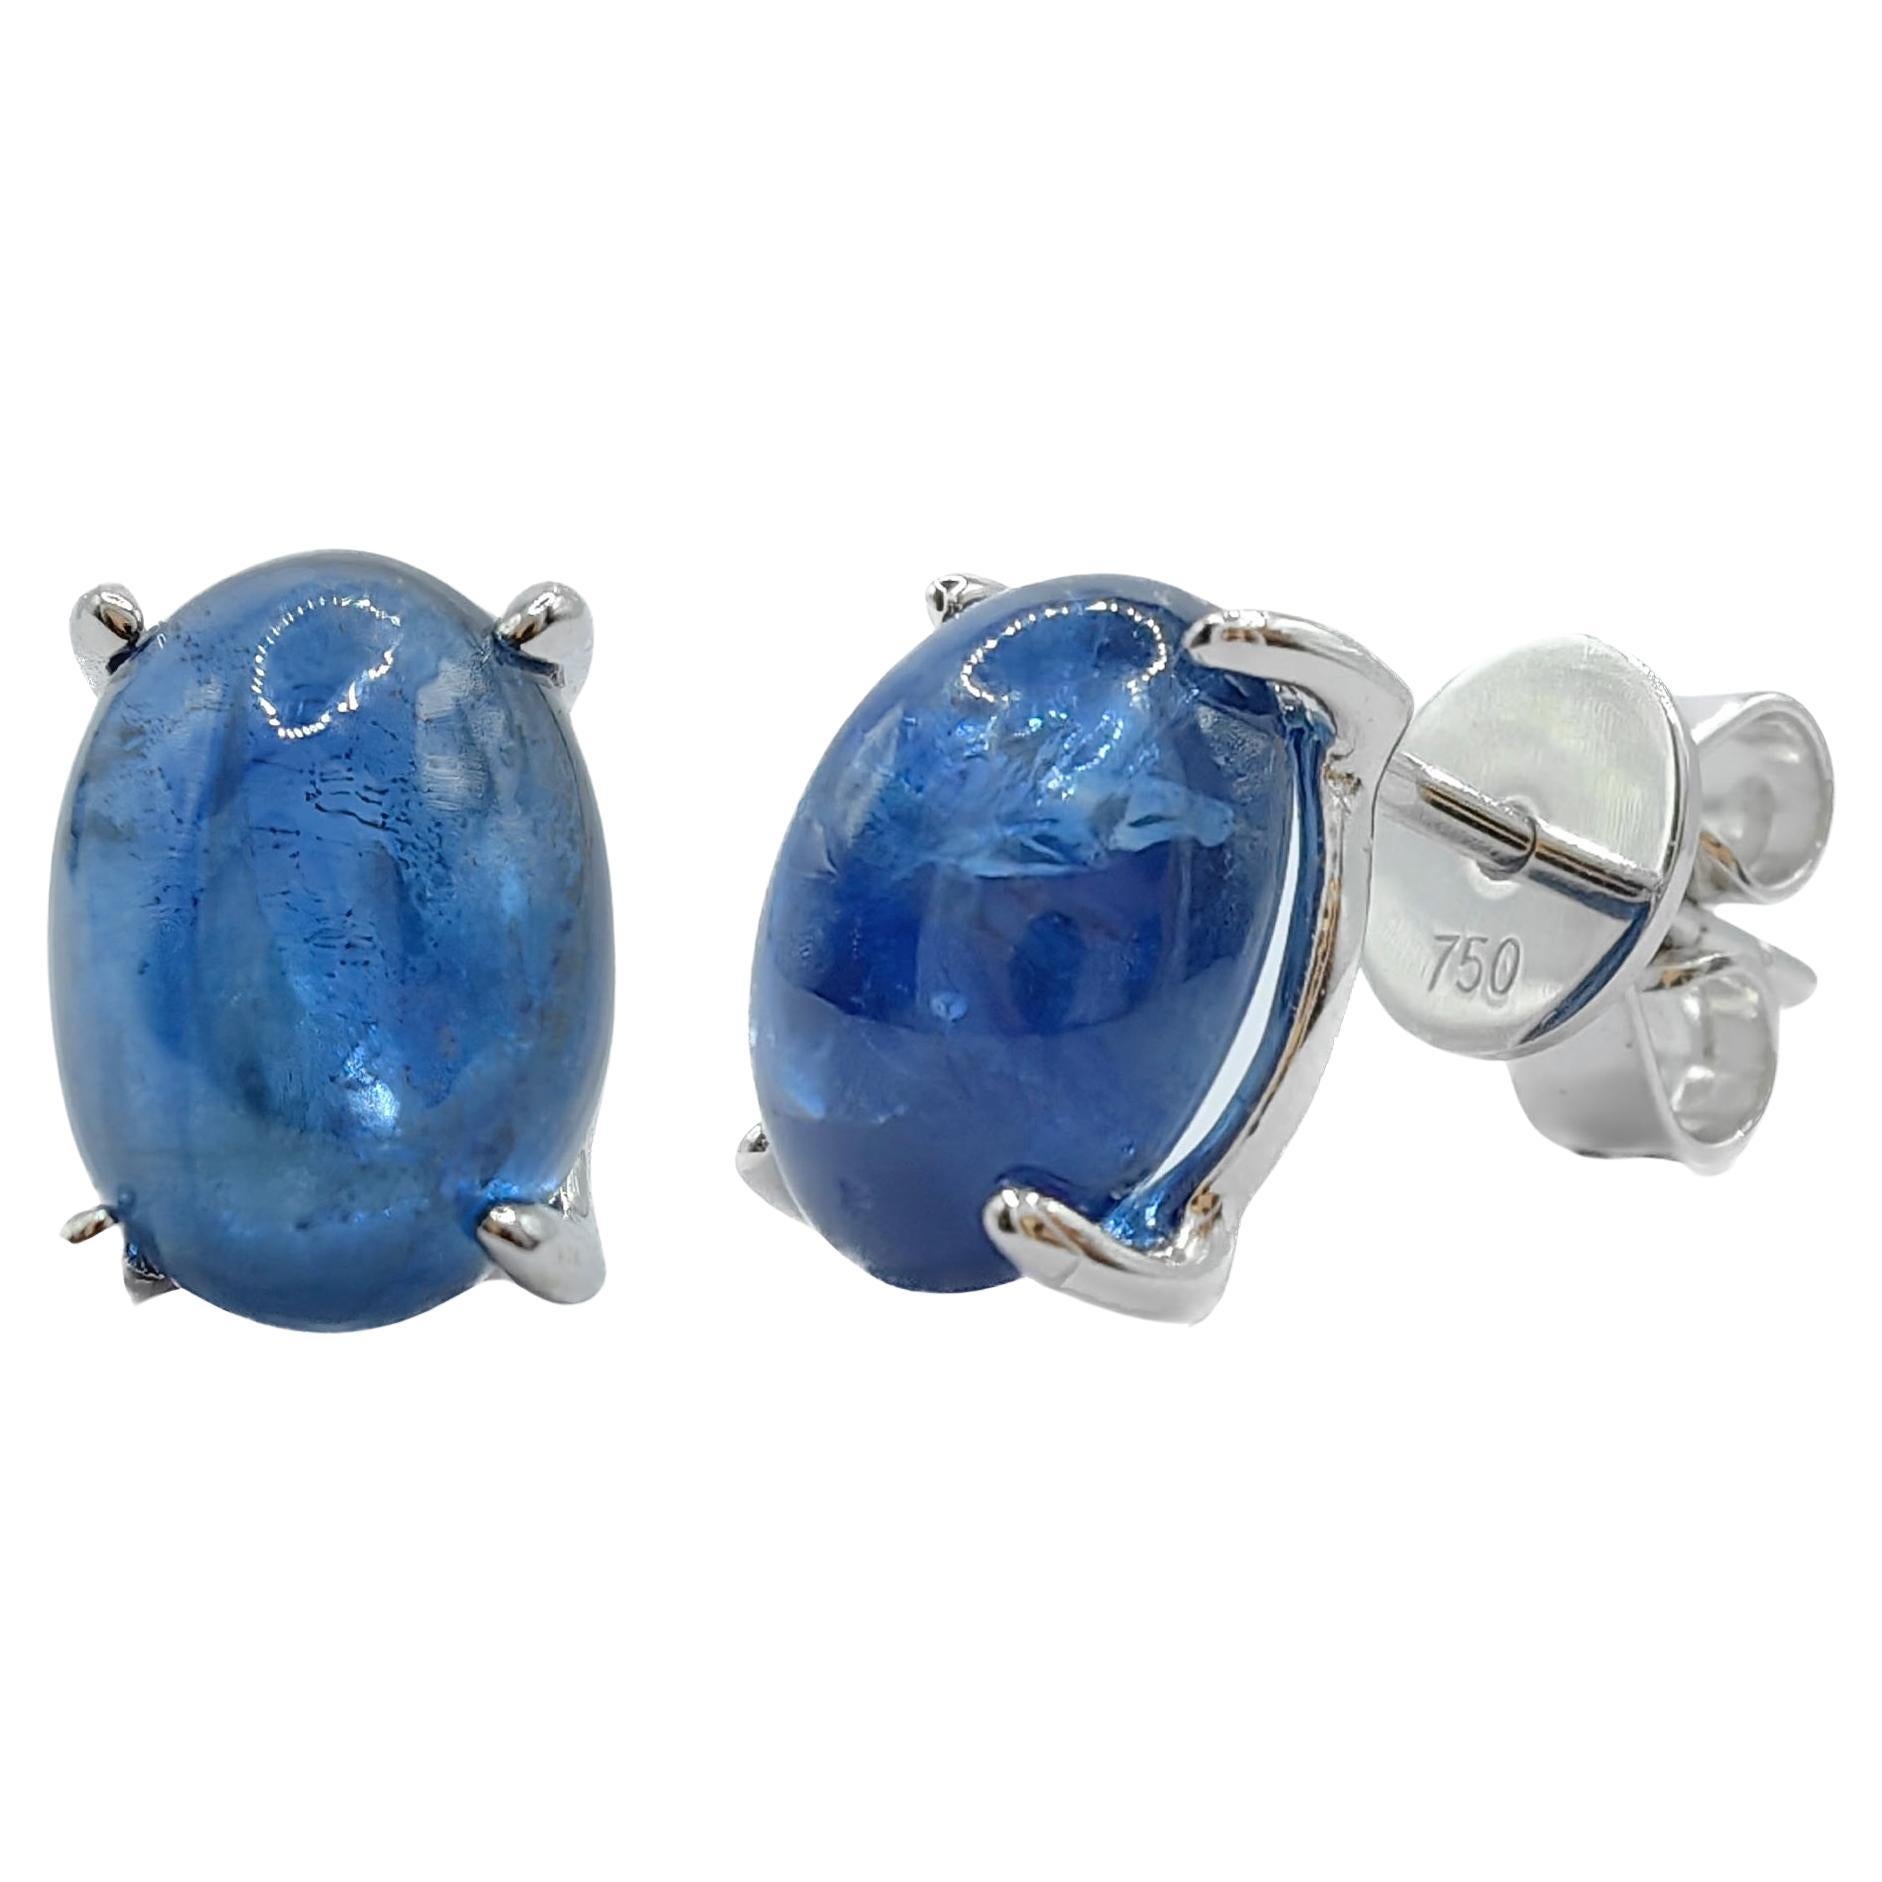 Matched 4.67 Carat 8x6mm Cabochon Blue Sapphire Stud Earrings in 18K White Gold For Sale